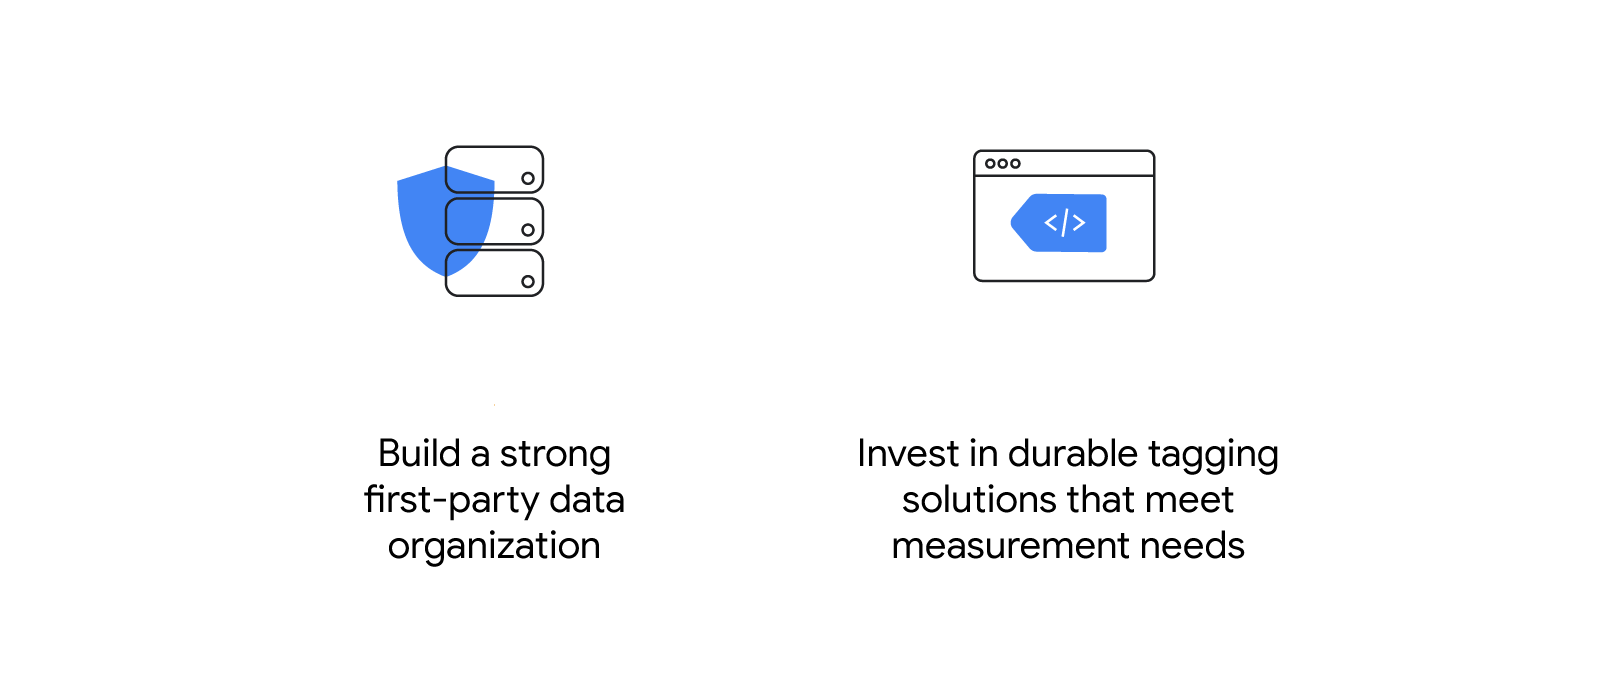 Key steps to building digital infrastructure: Build a strong first-party data organization. Invest in durable tagging solutions that meet measurement needs.